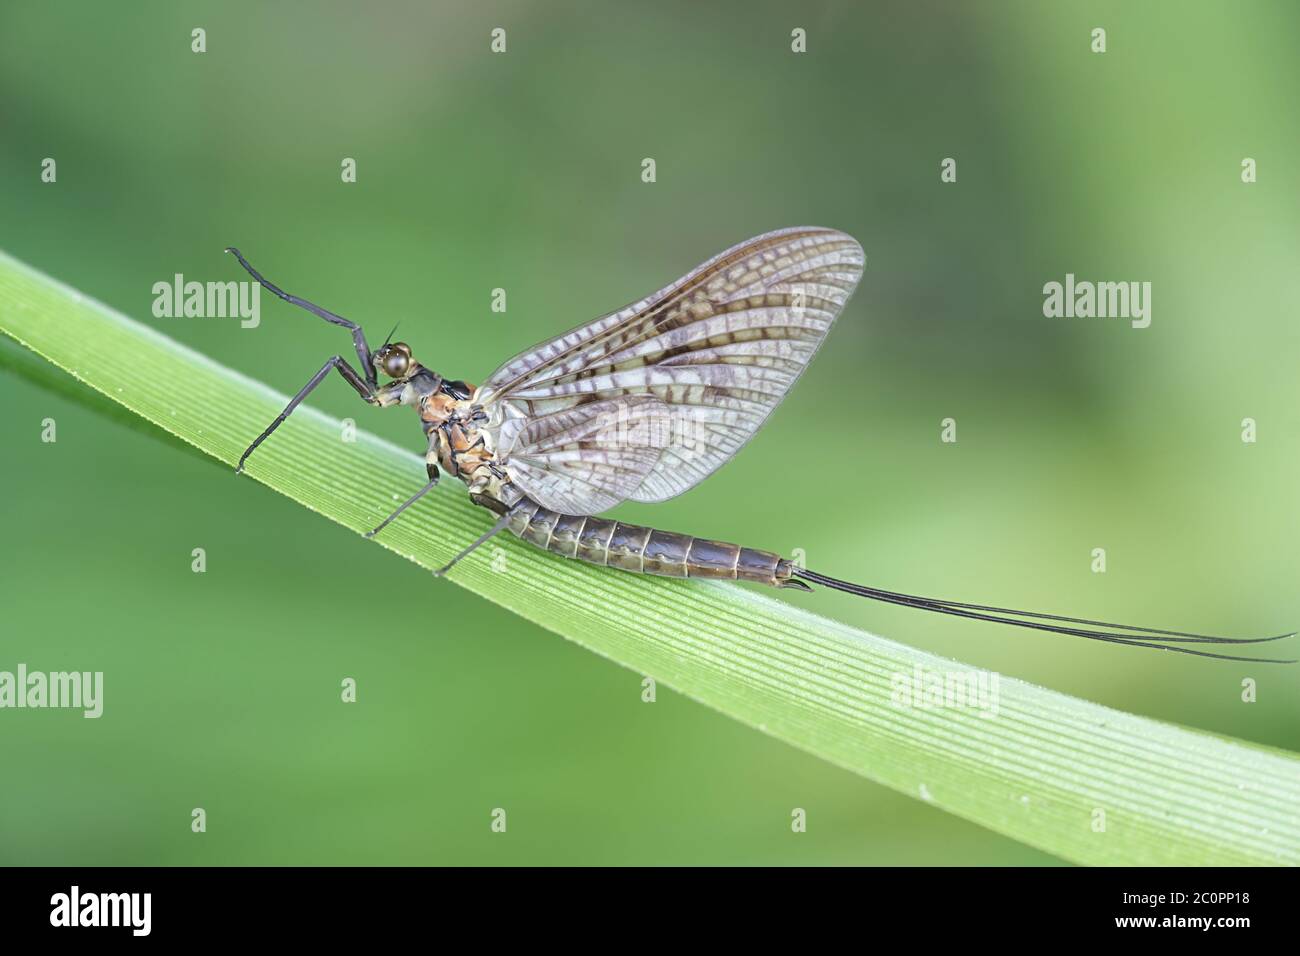 Ephemera vulgata, a species of mayfly in the genus Ephemera, also commonly called as Canadian soldier, shadfly or fishfly Stock Photo